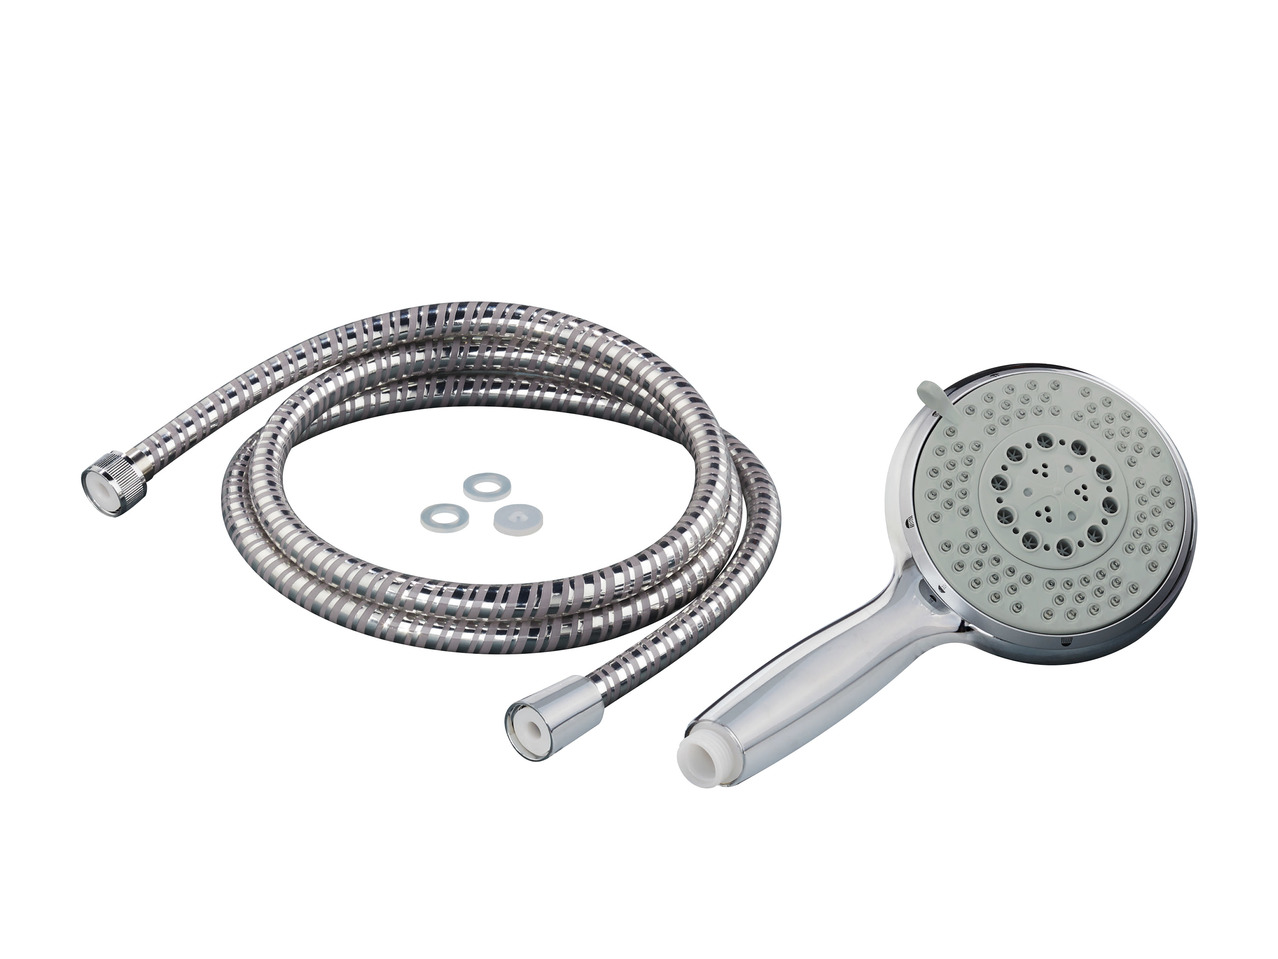 Miomare Multi-Functional Shower Head1